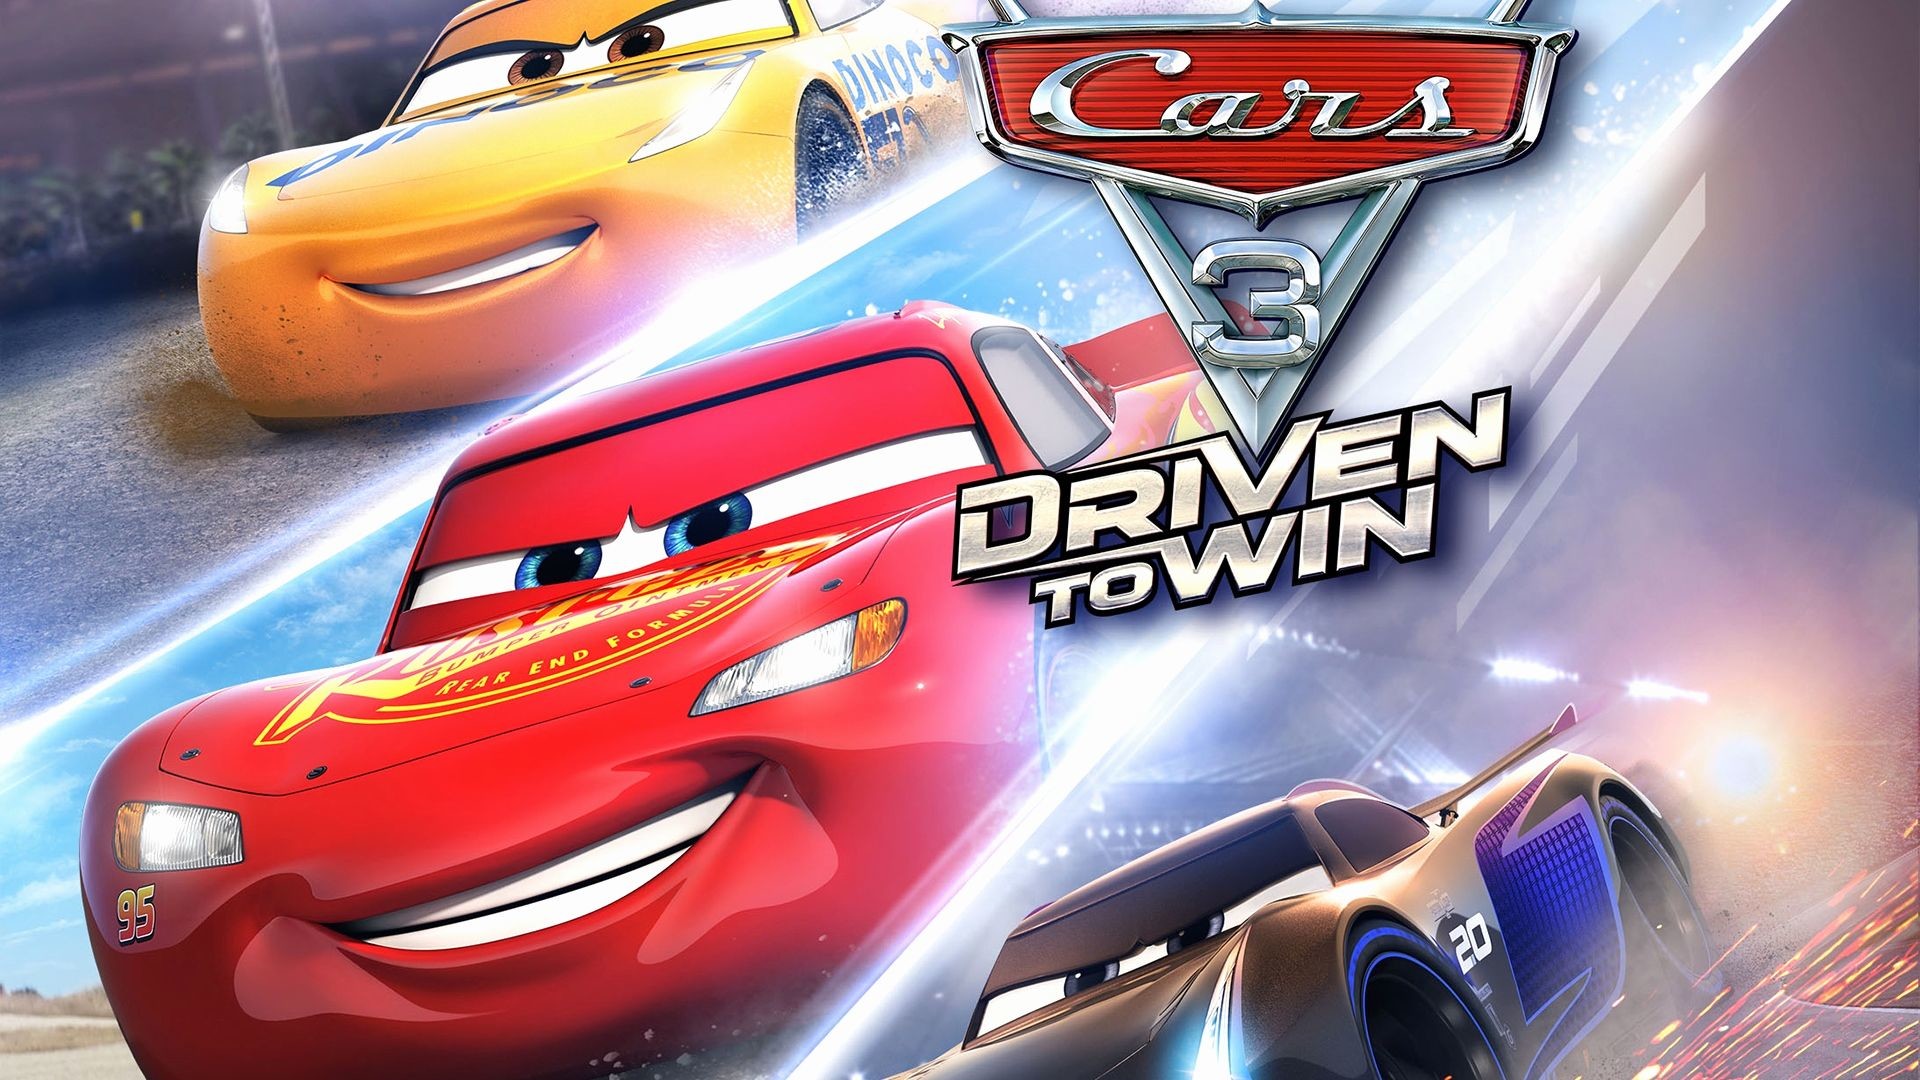 1920x1080 Disney Cars Wallpapers Awesome Cars 3 Wallpaper Wallpapers Browse